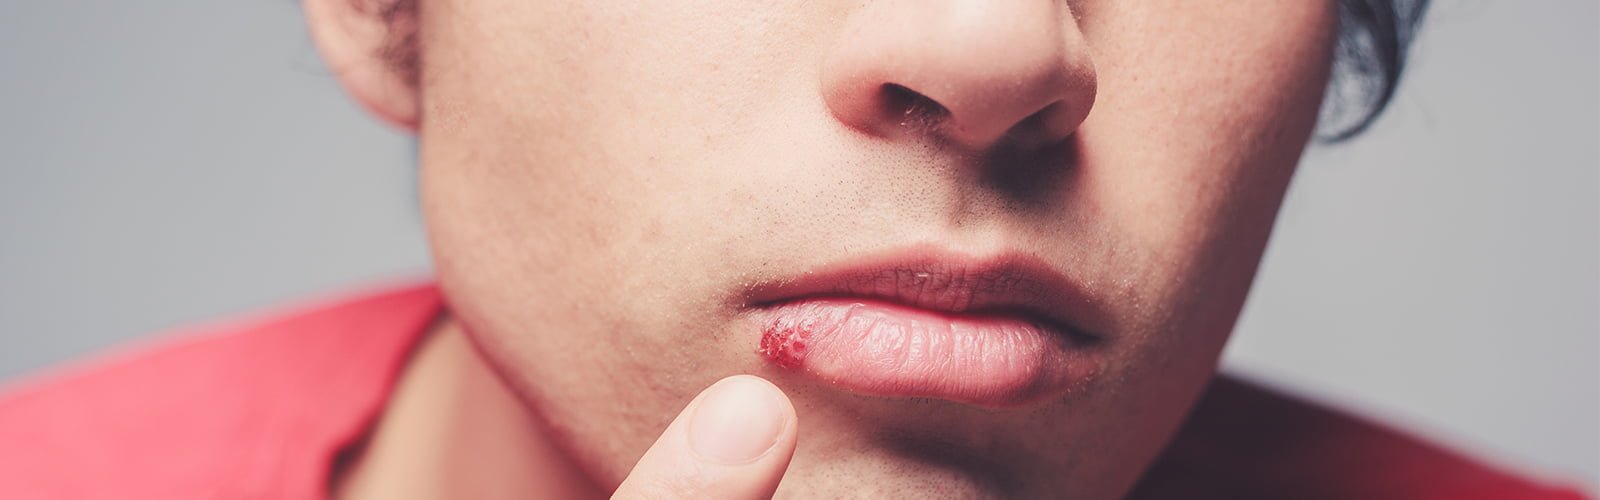 á? Do Herpes/Cold Sore Home Remedies Really Work?